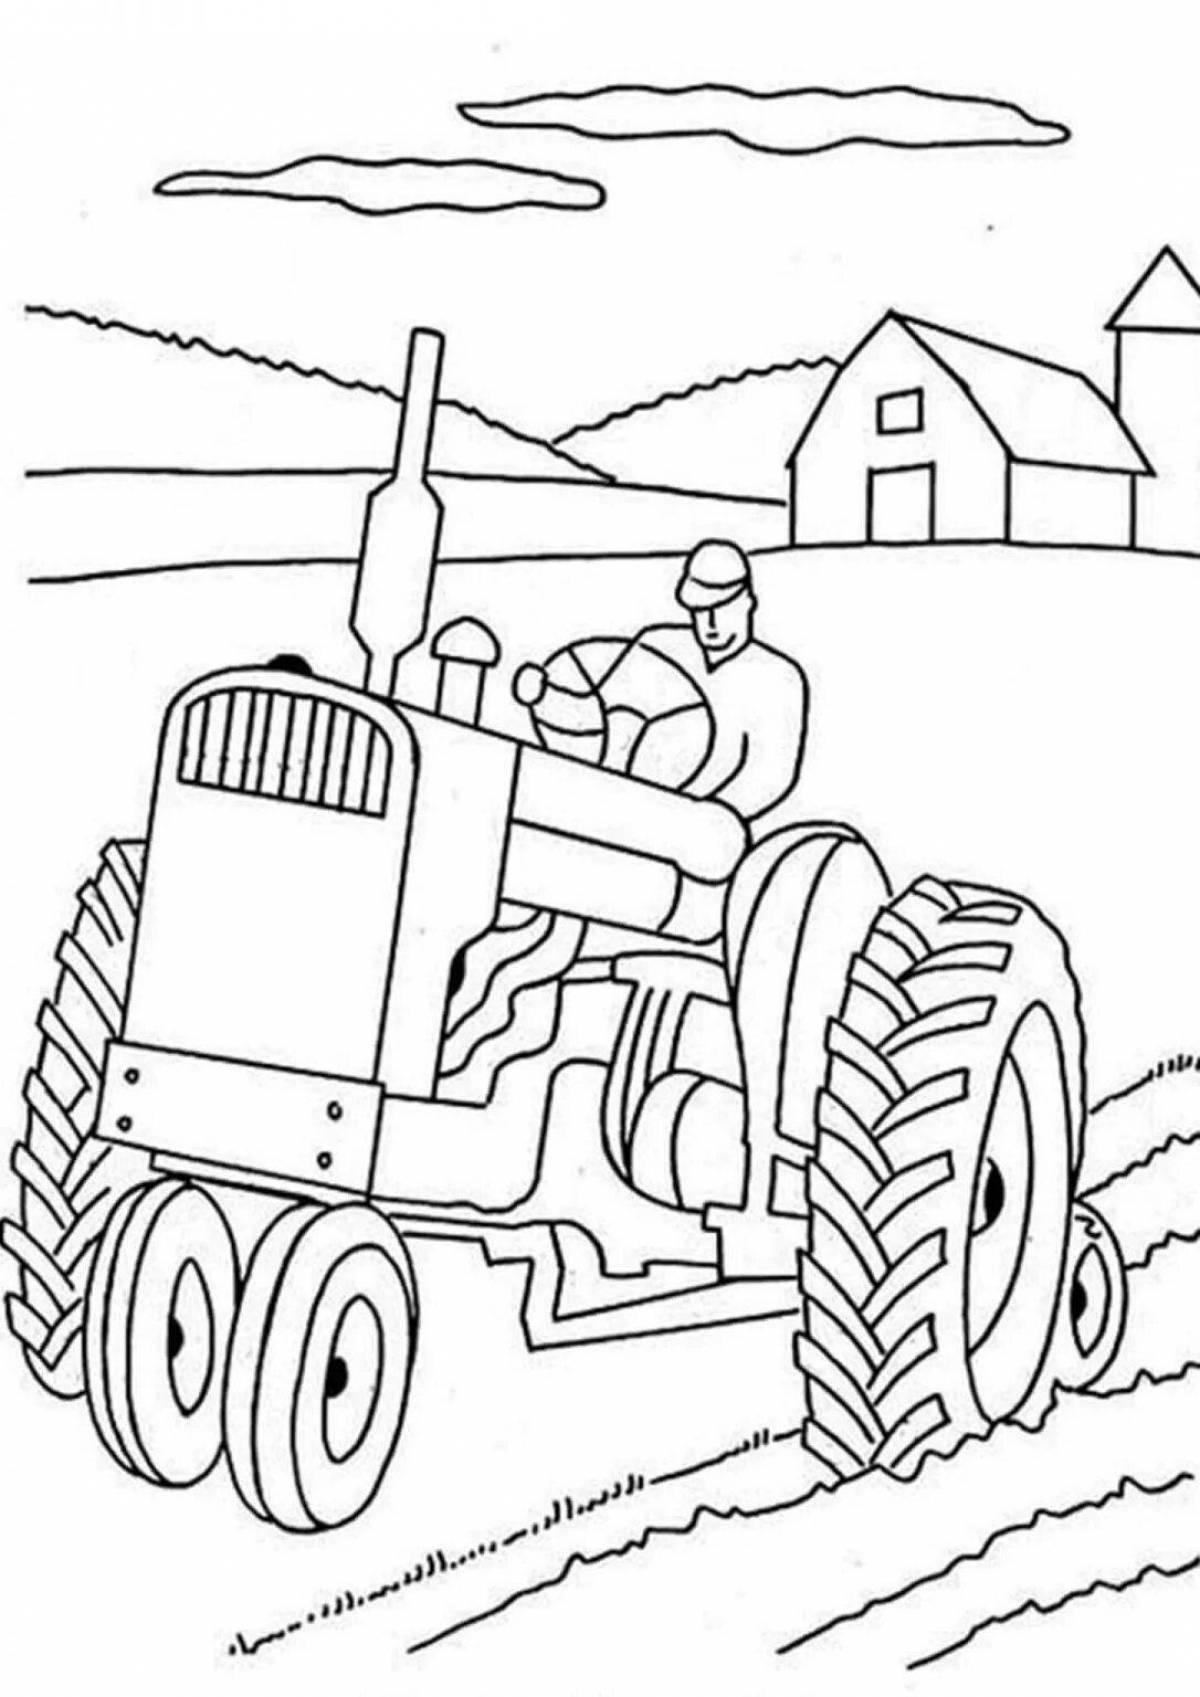 Coloring book funny harvester for the little ones